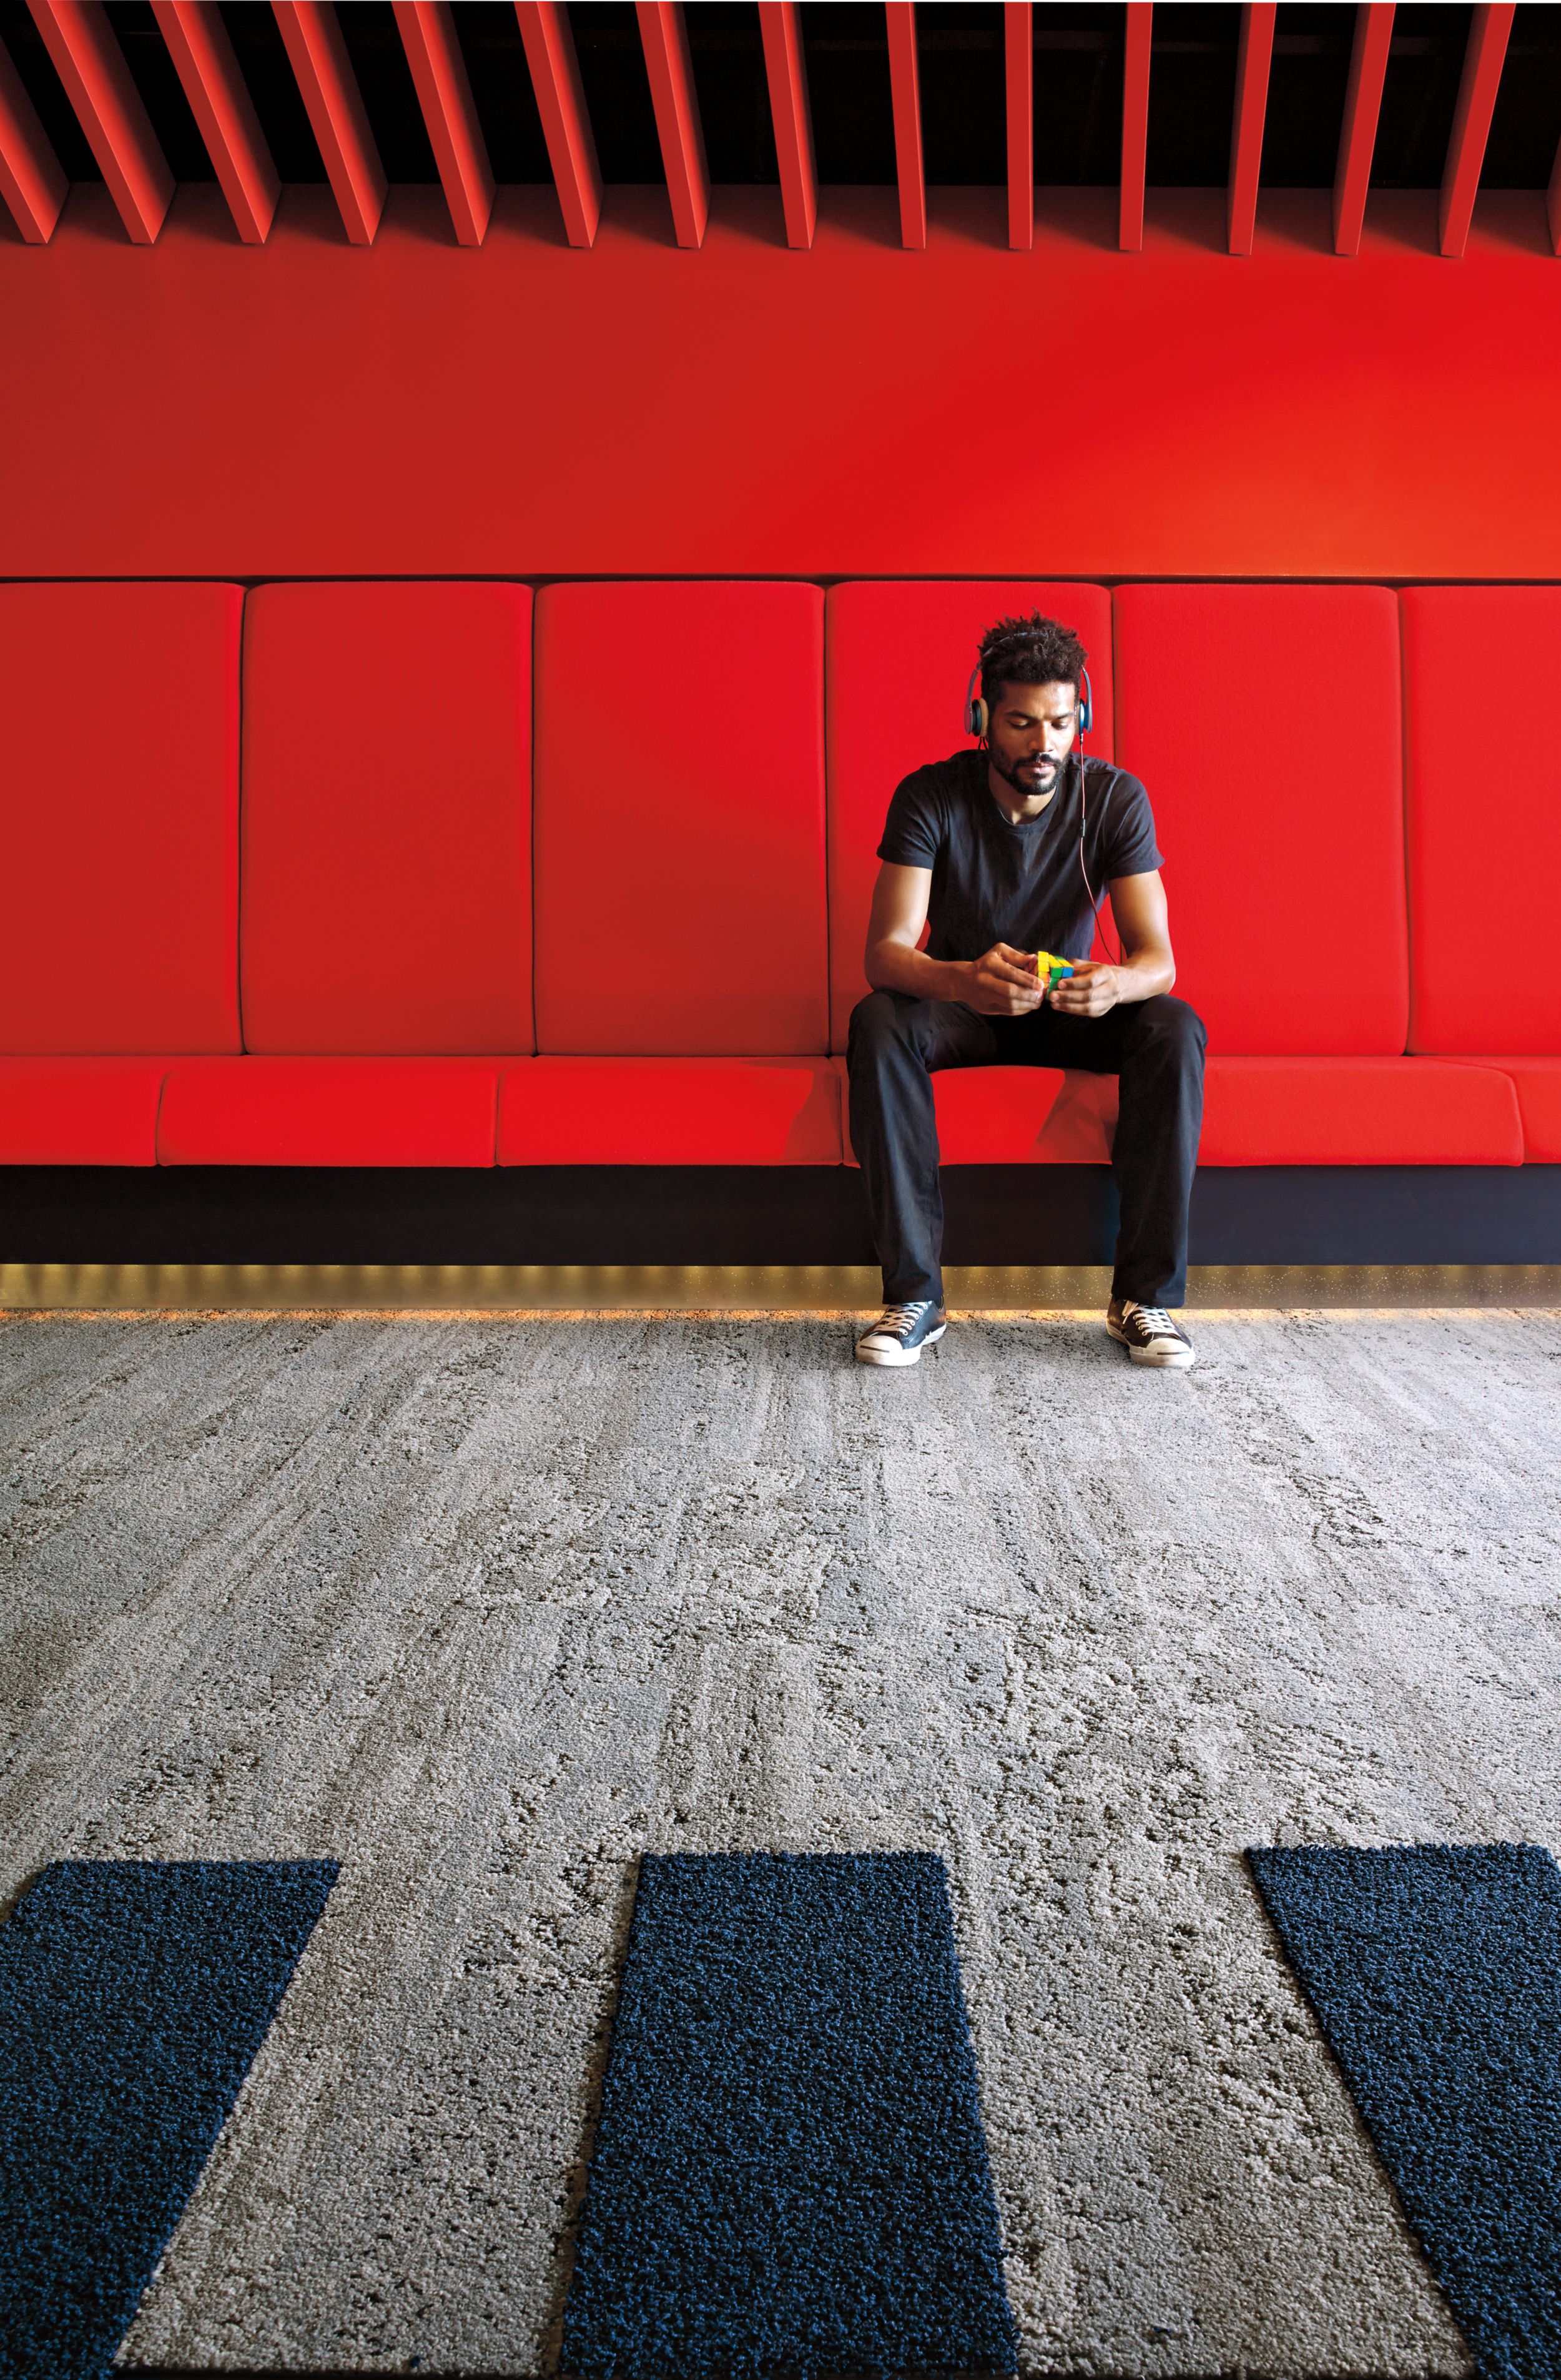 Interface HN810 plank carpet tile in waiting area with red bench and wall and man listening to music afbeeldingnummer 7